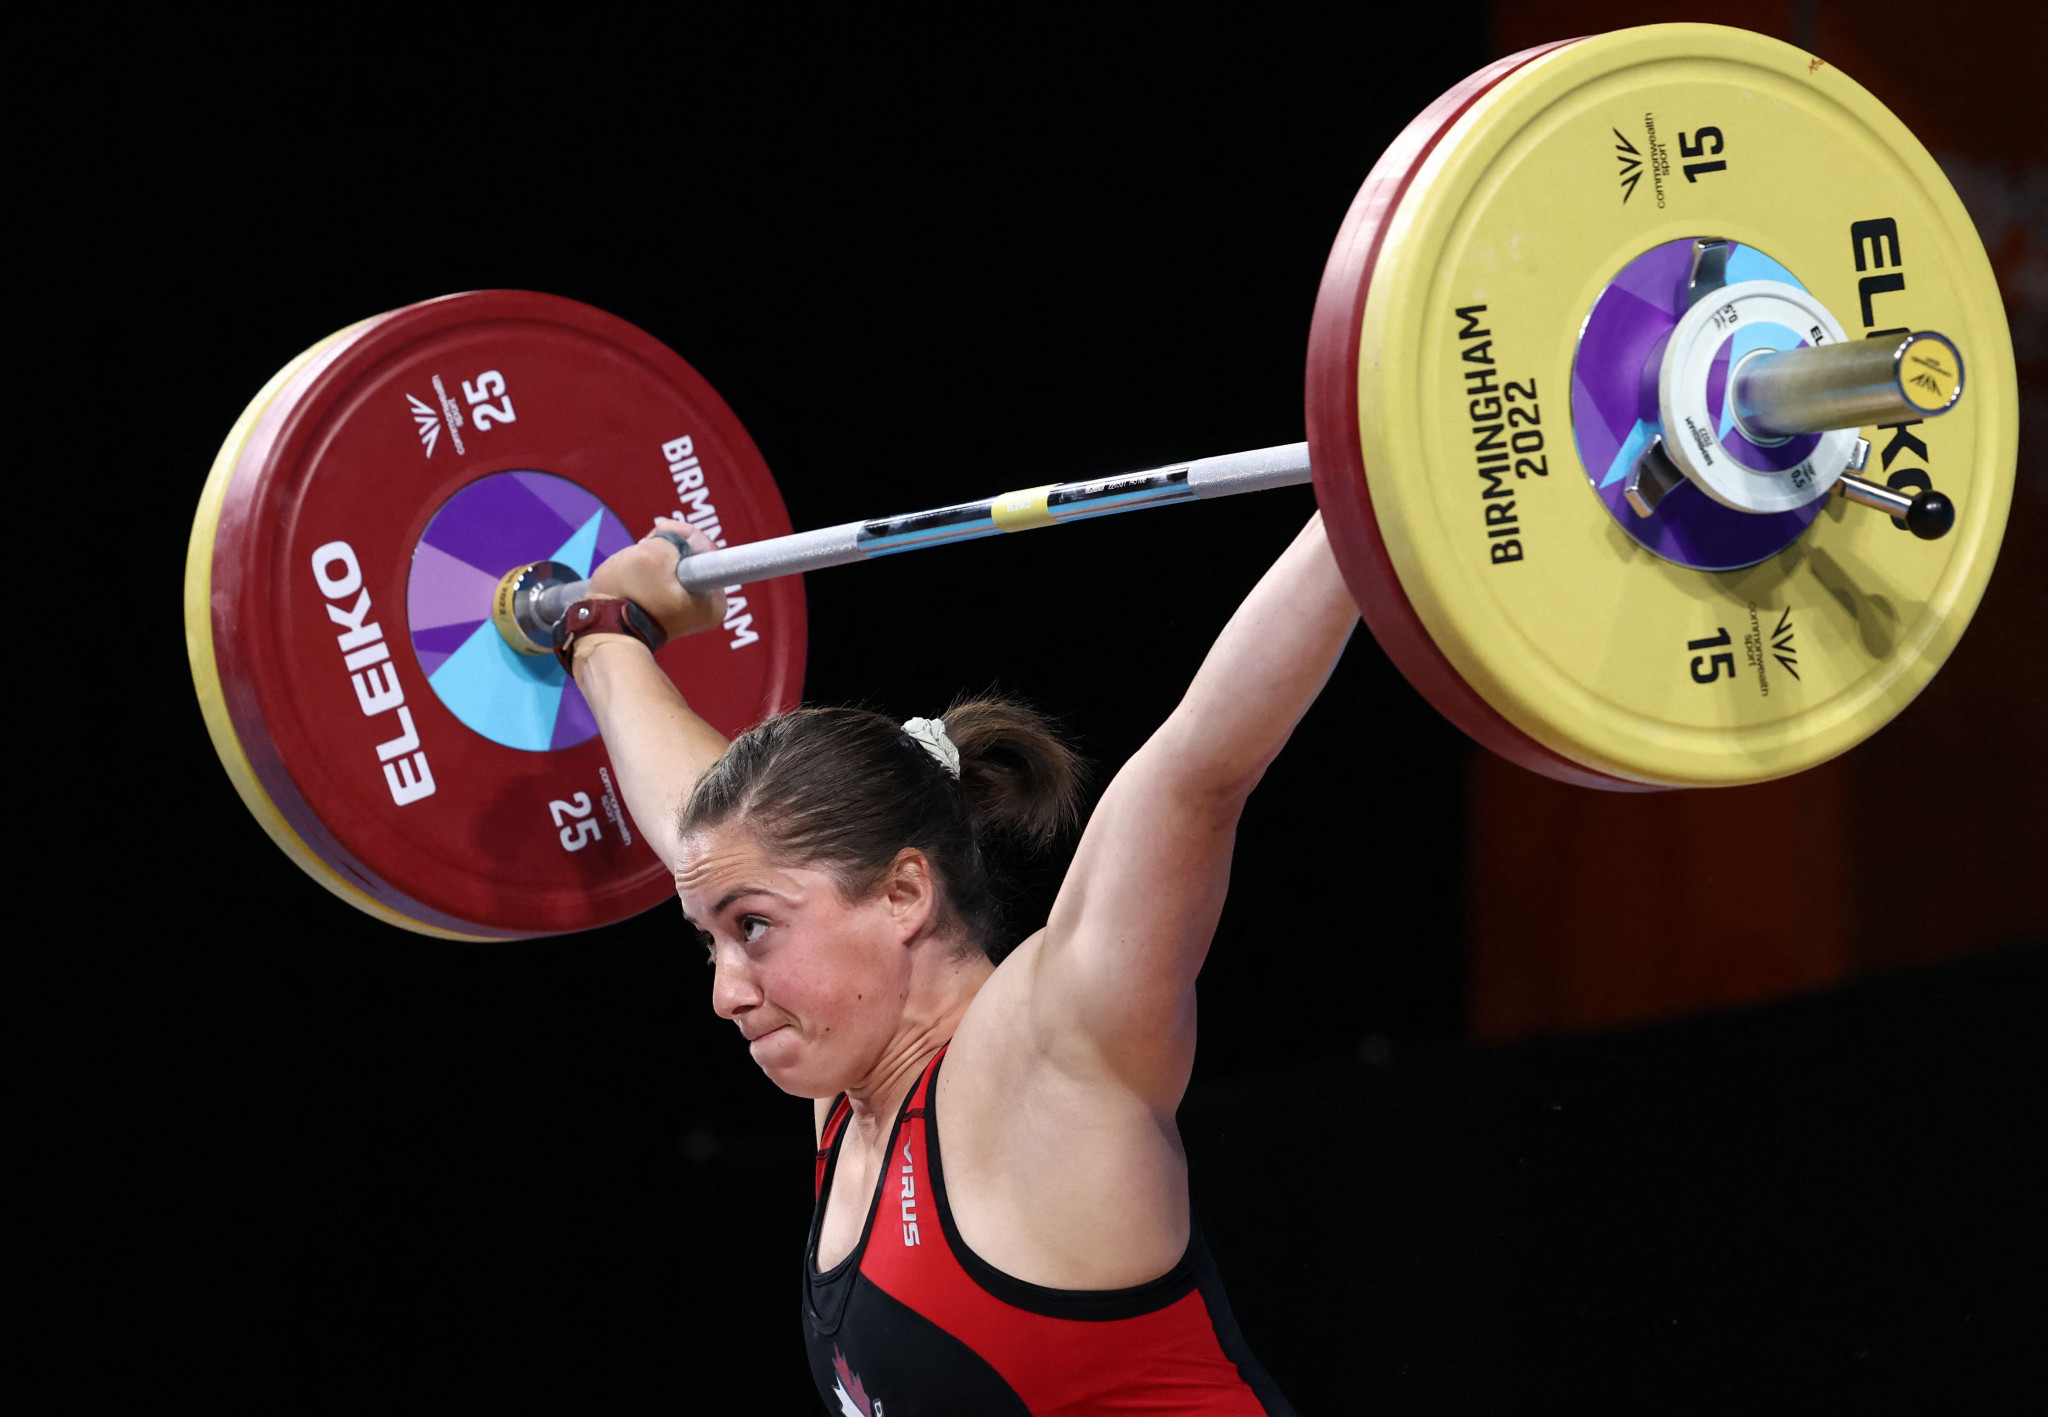 Canadian Maude Charron was also elected to the IWF Athletes Commission during this year's World Championships ©Getty Images